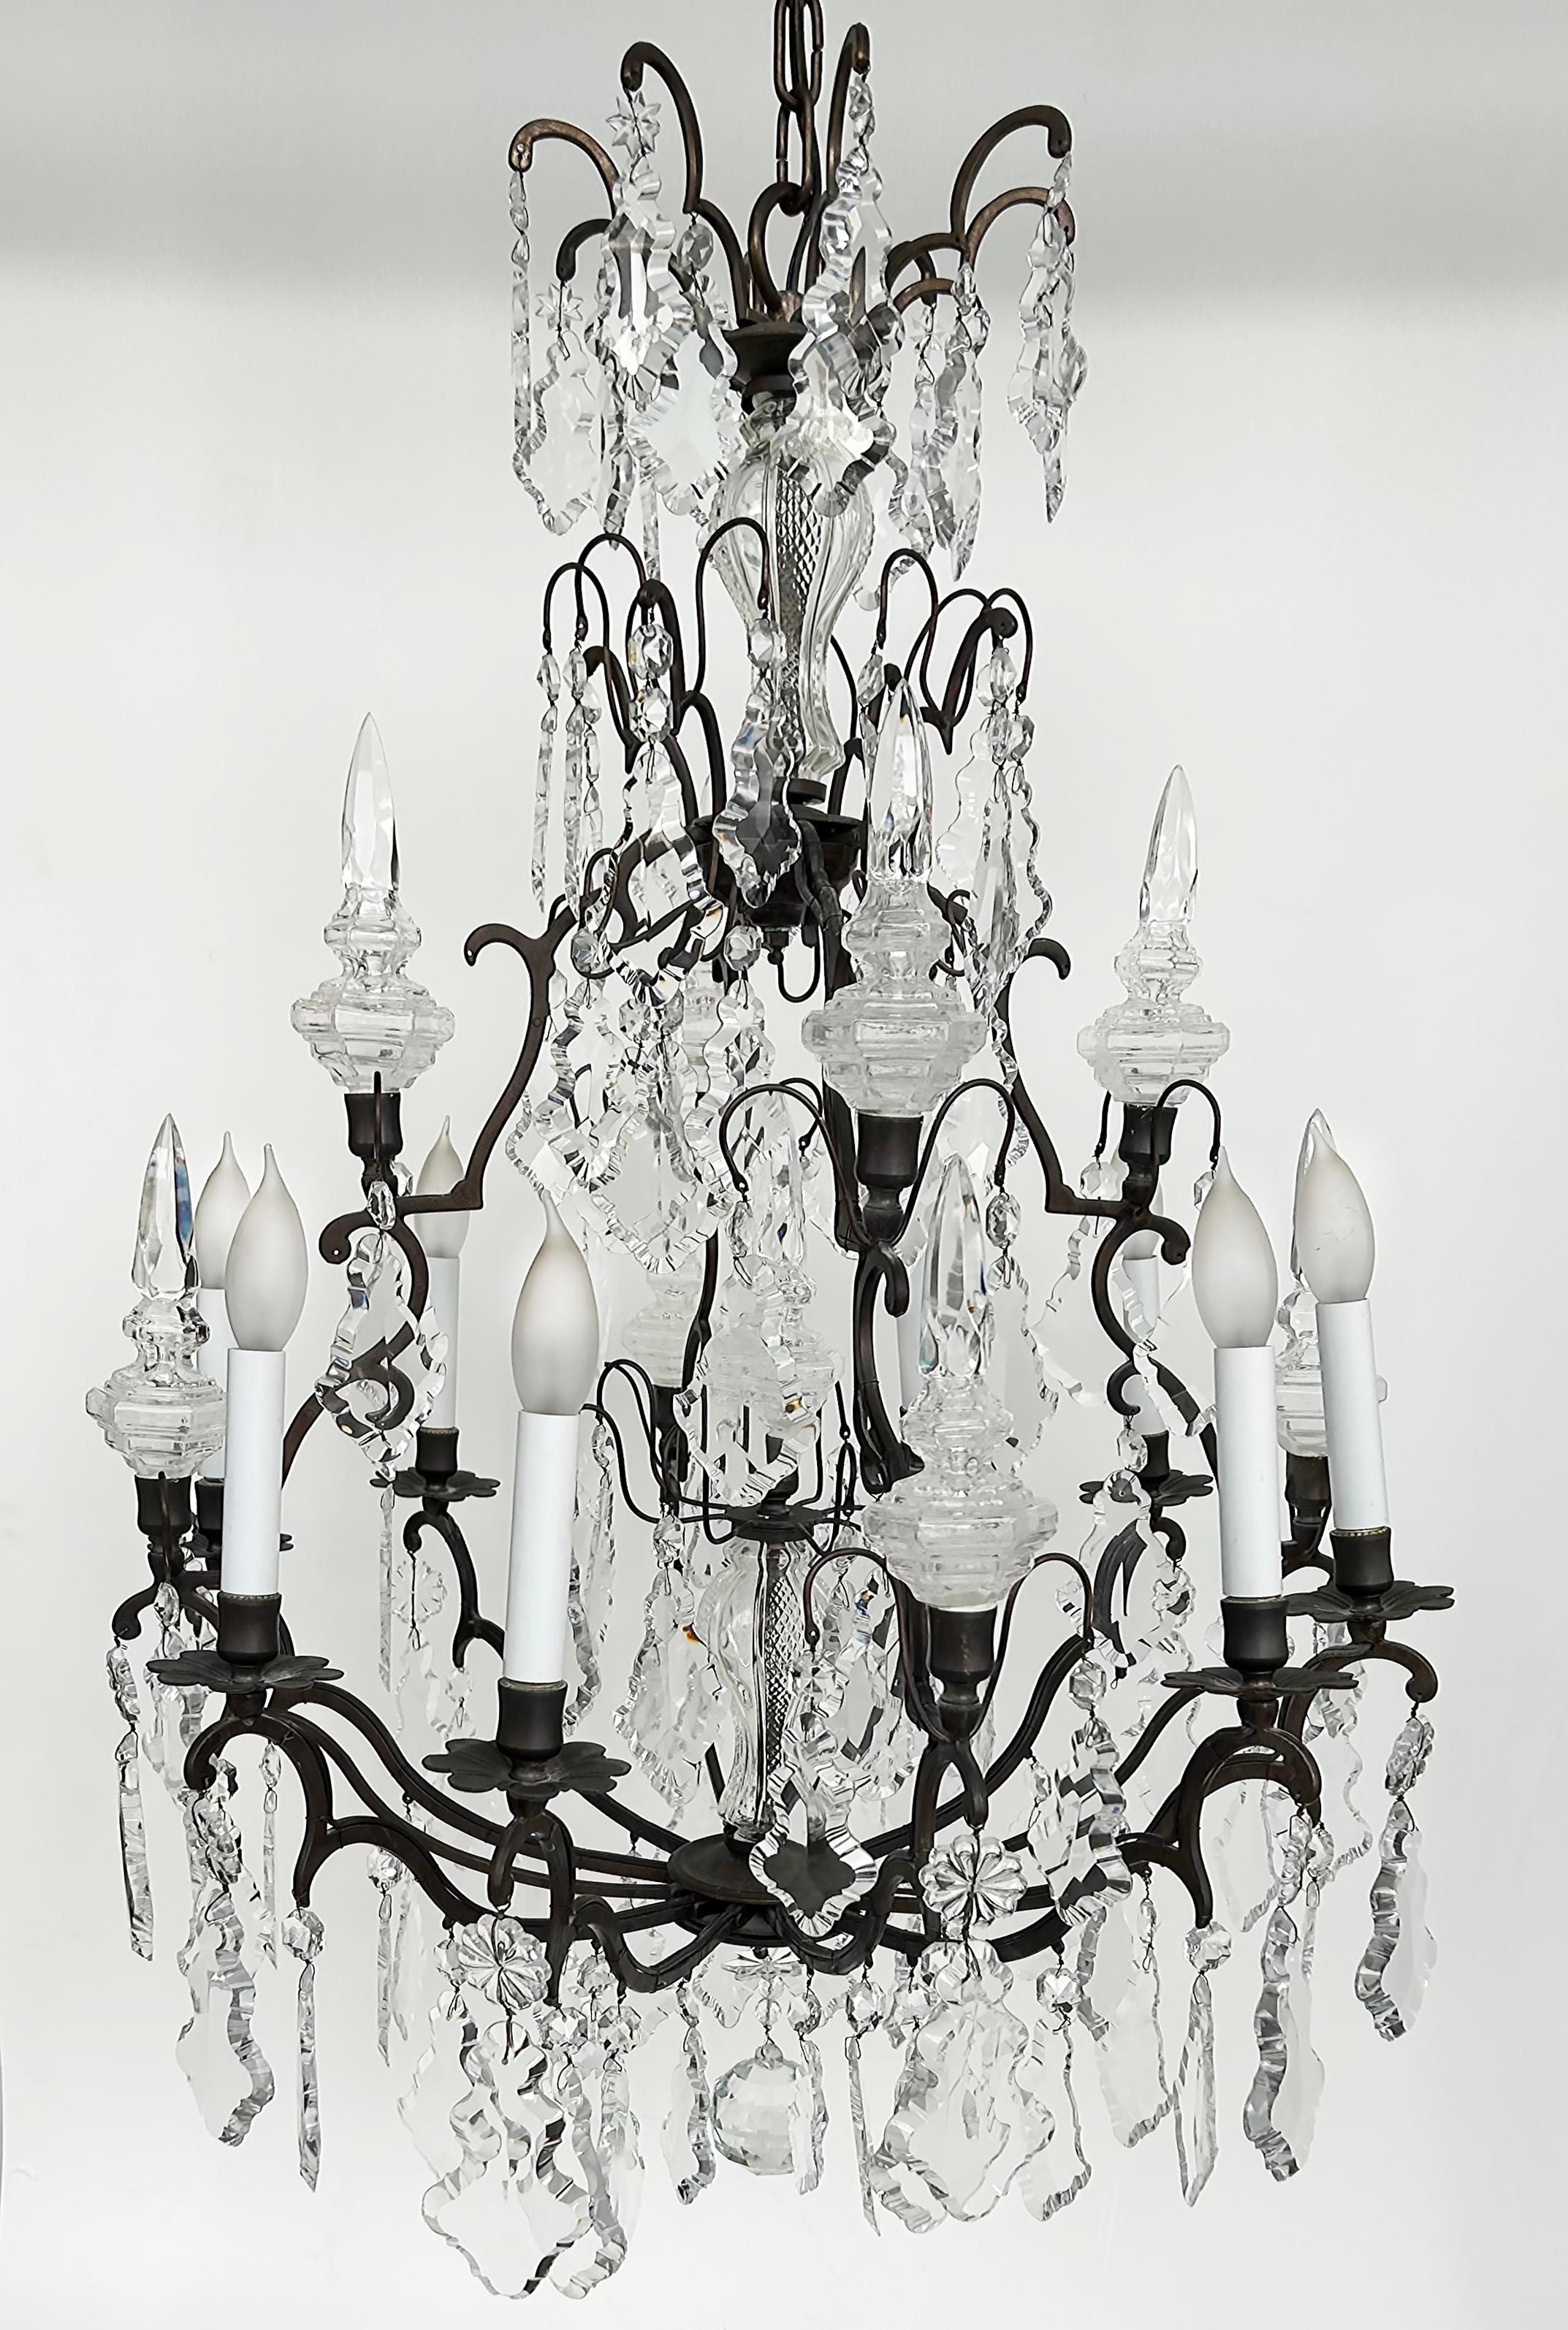 Antique French Louis XV Style Bronze Chandelier, Cut Crystal 

Offered for sale is an 19th century ornate and dense cut-crystal chandelier on a Louis XV-style bronze frame. The fixture has been electrified and is French-wired to accept candelabra